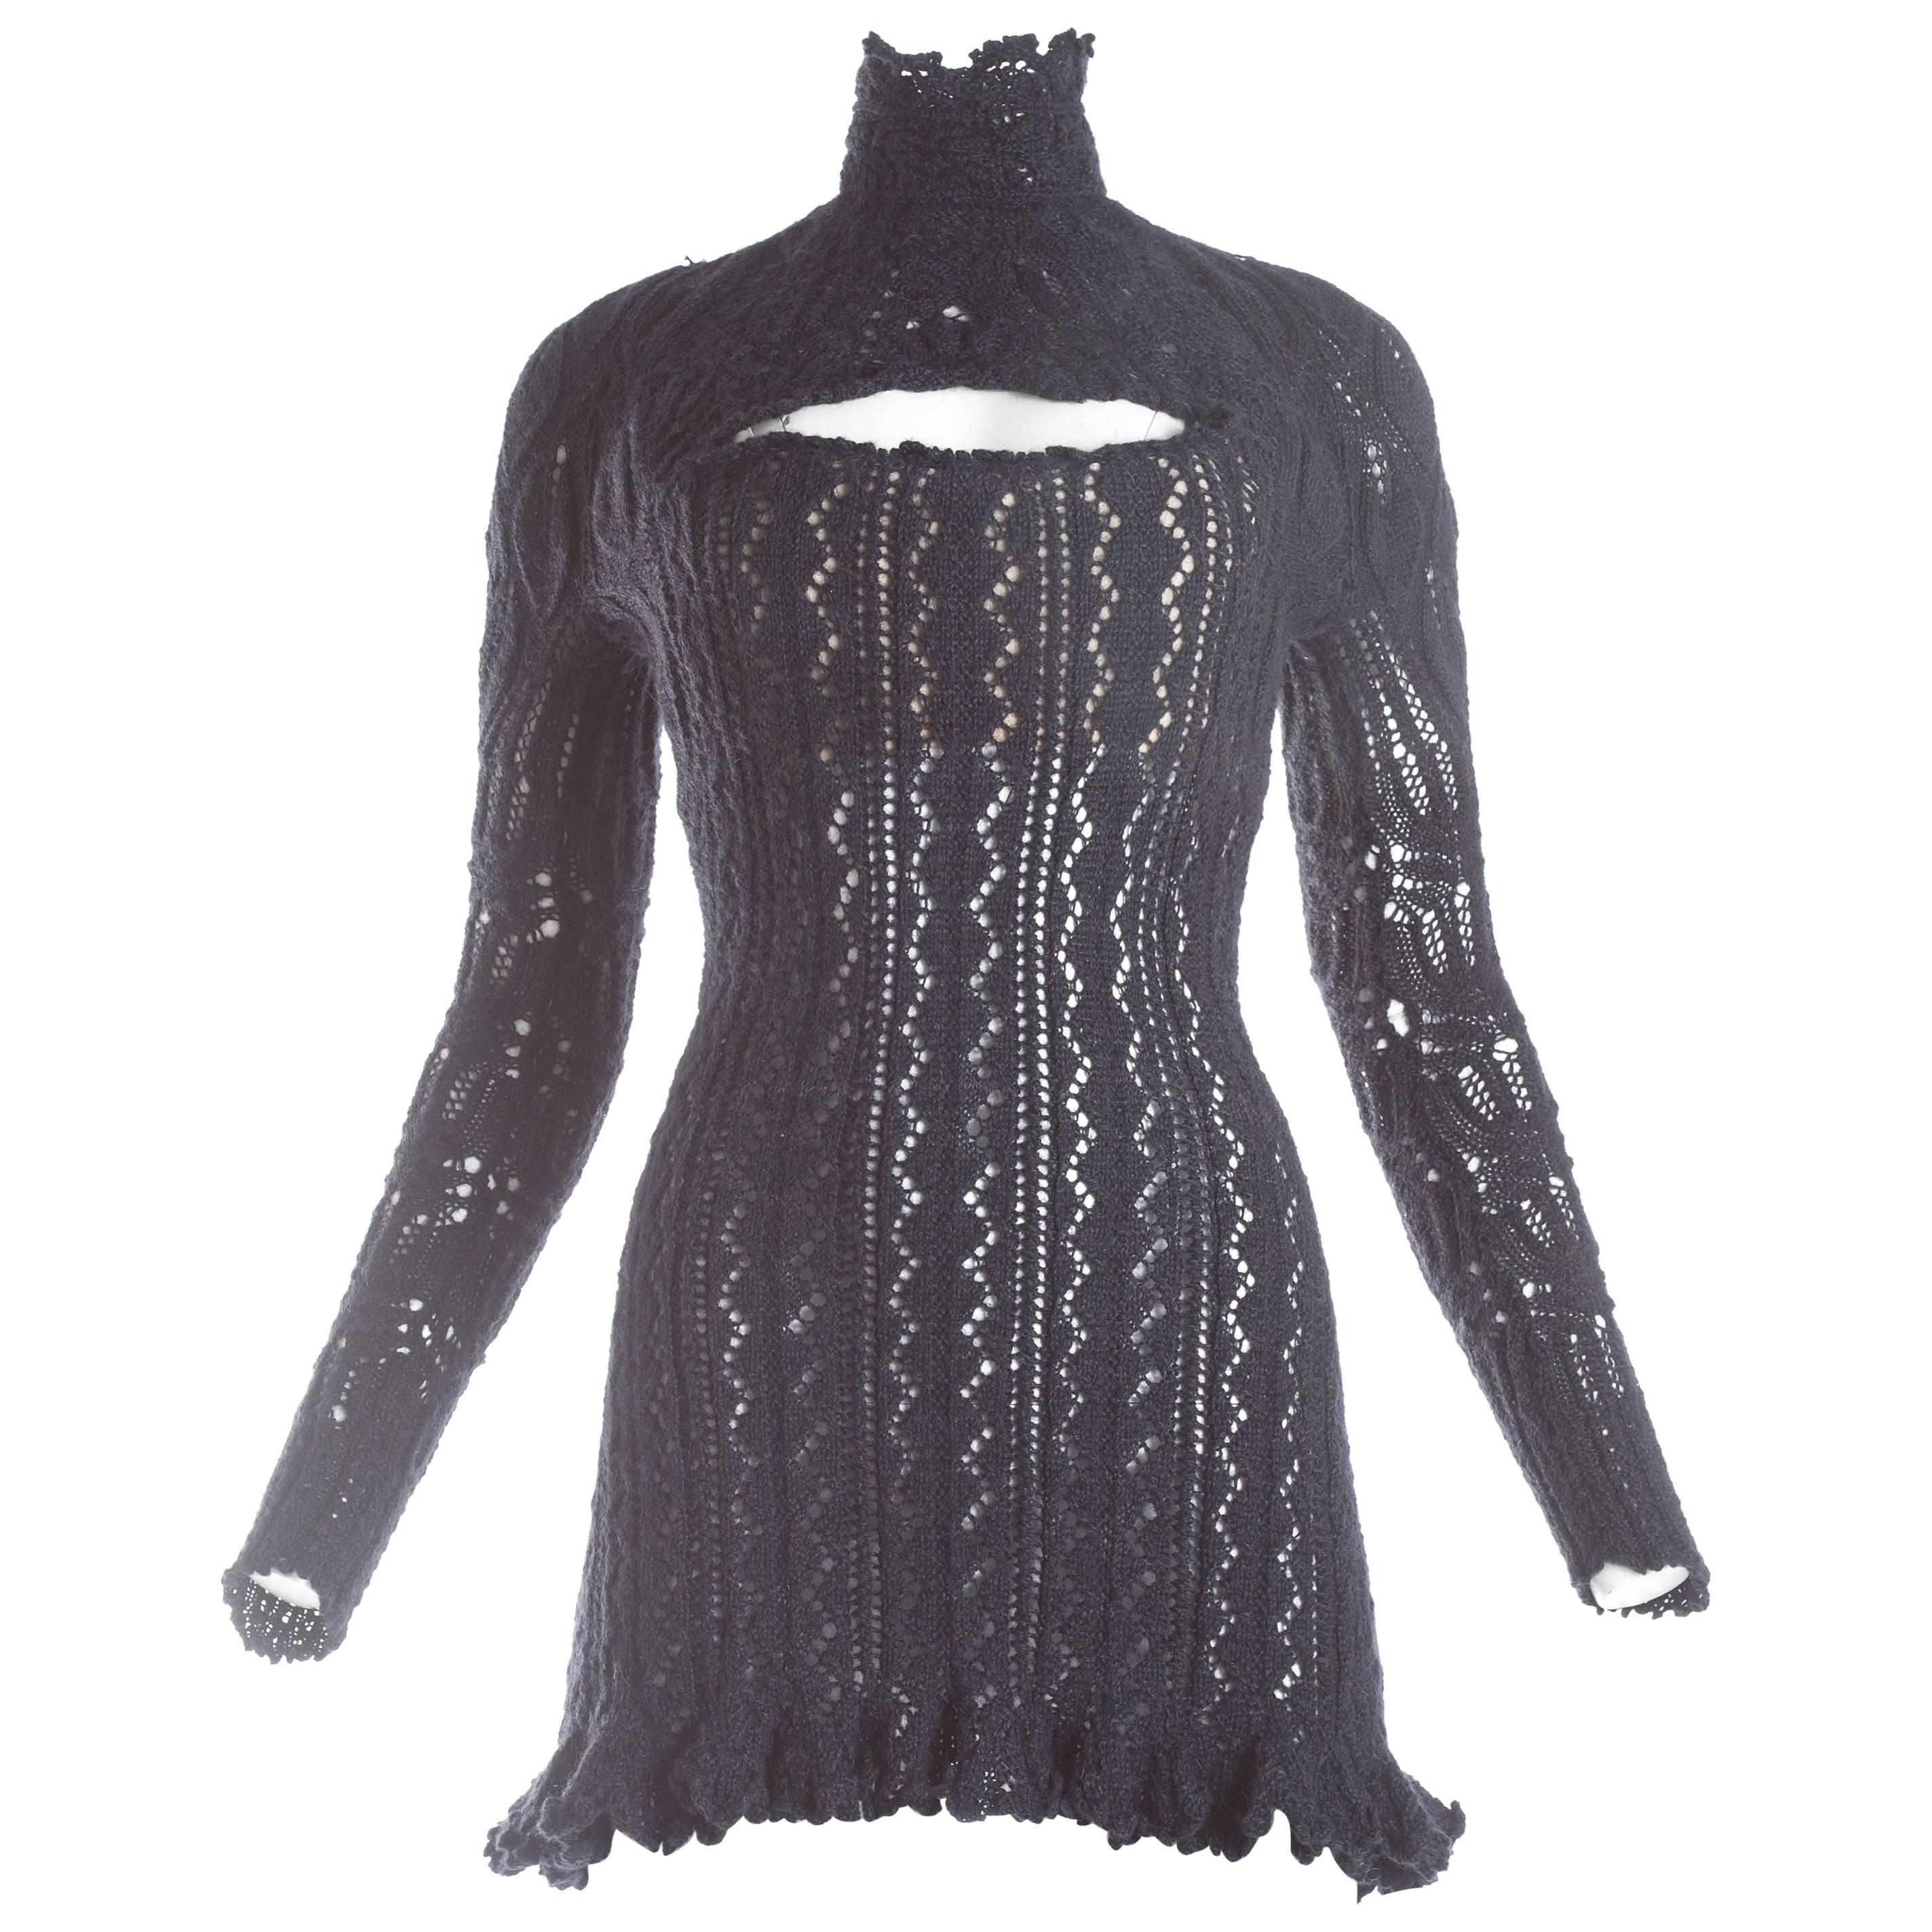 Vivienne Westwood knitted mini dress with internal corset, A / W 1993